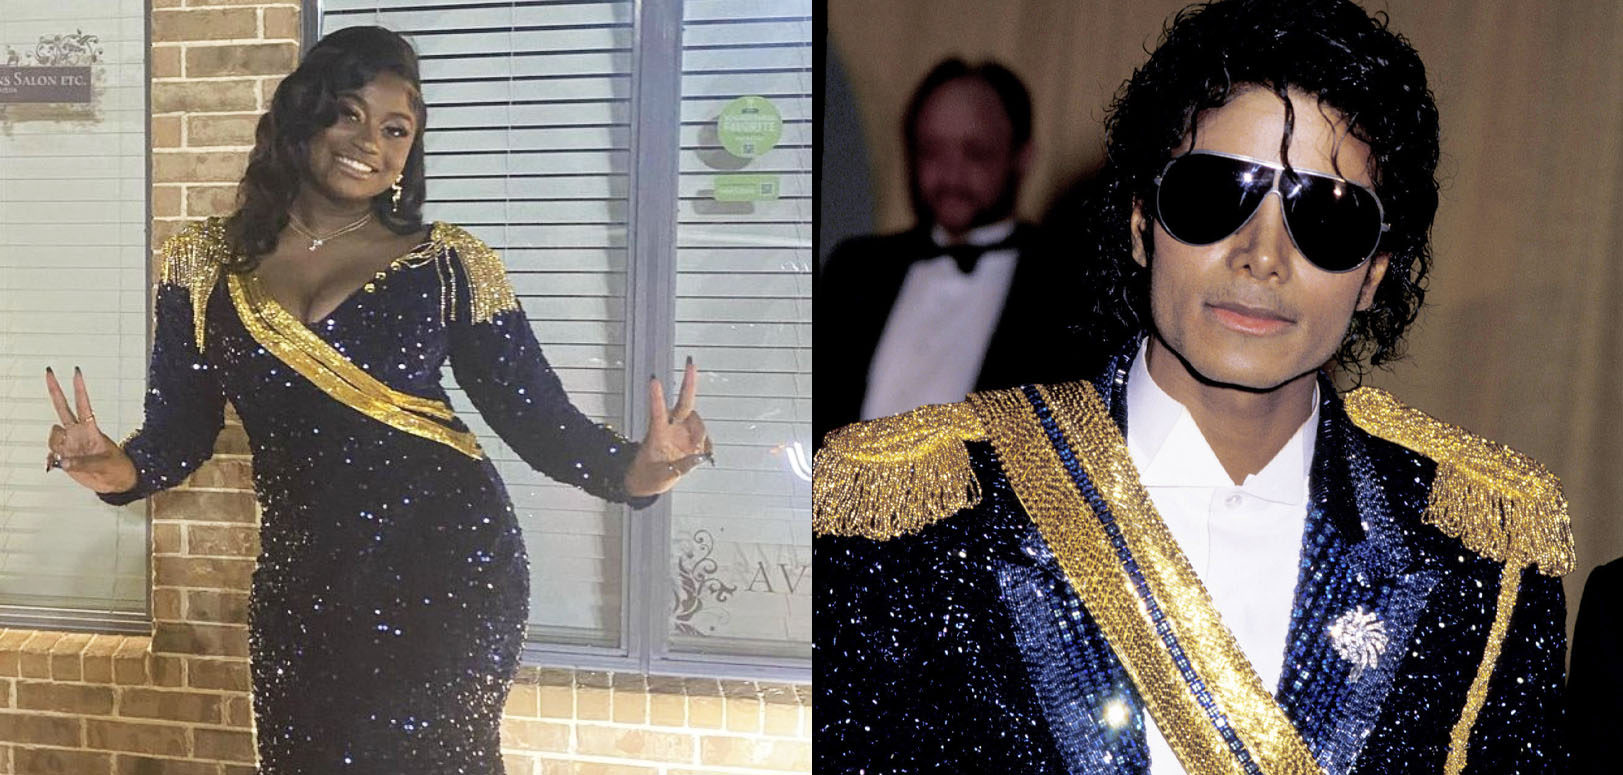 A Texas Teen Recreated Michael Jackson’s 1984 Grammys Look For Prom